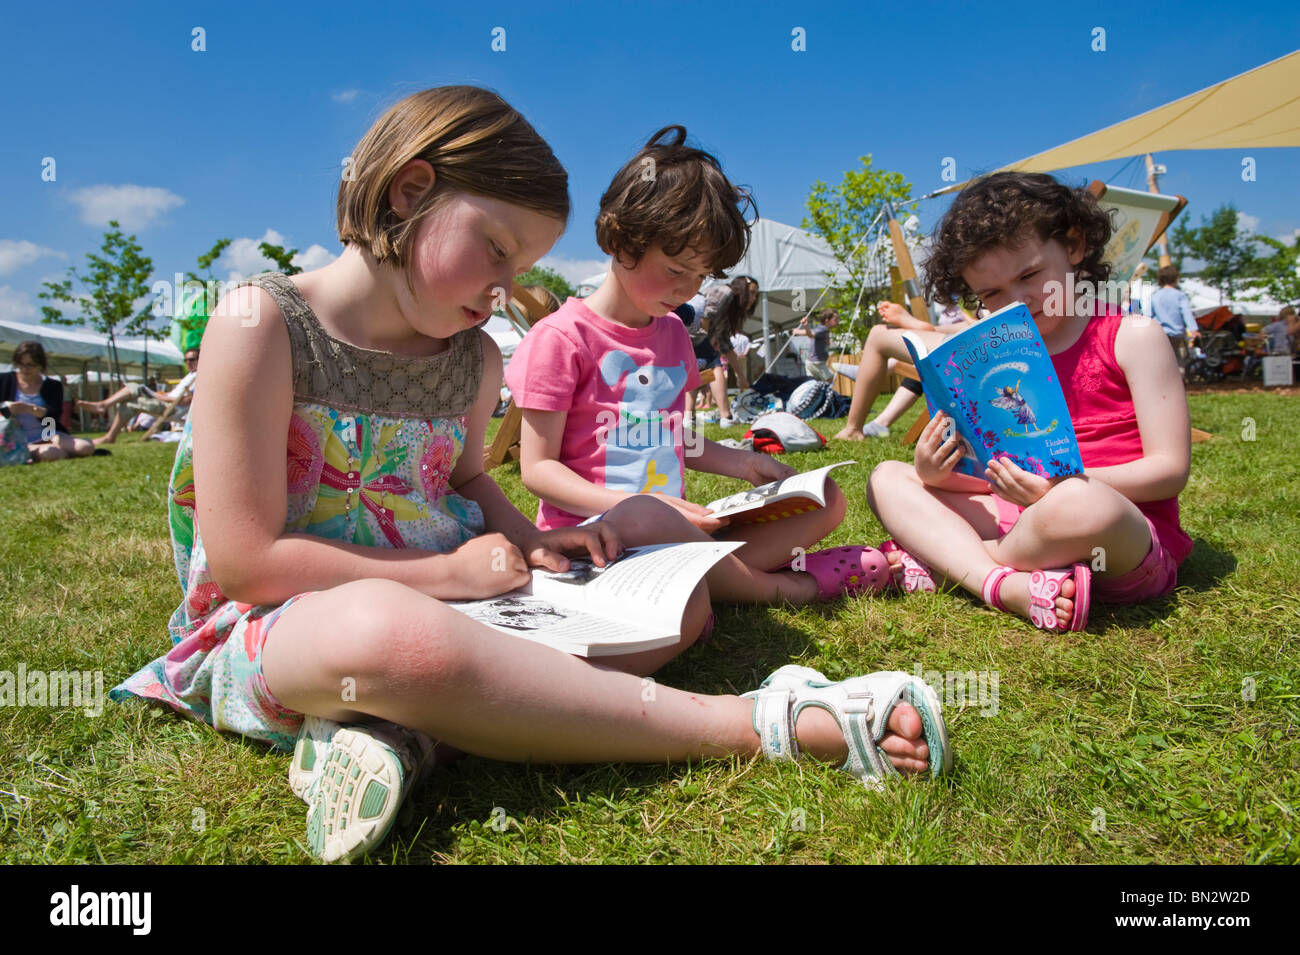 Three young girls sitting on the grass reading books in the summer sunshine at Hay Festival 2010 Hay on Wye Powys Wales UK Stock Photo